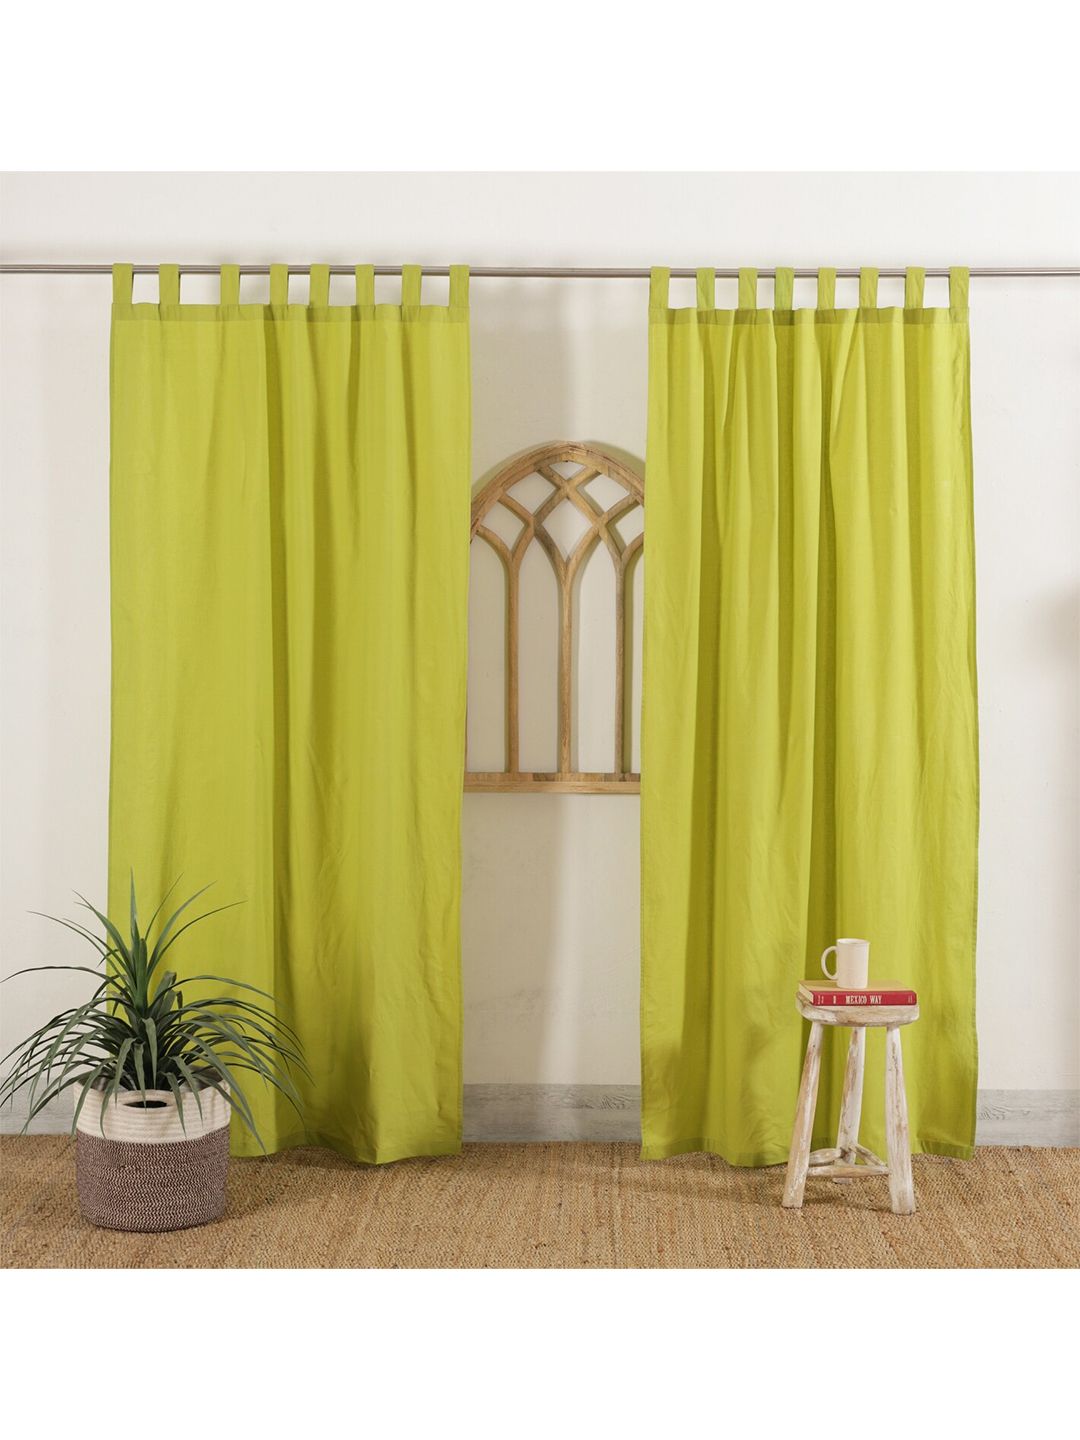 HANDICRAFT PALACE Lime Green Set of 2 Black Out Door Curtain Price in India